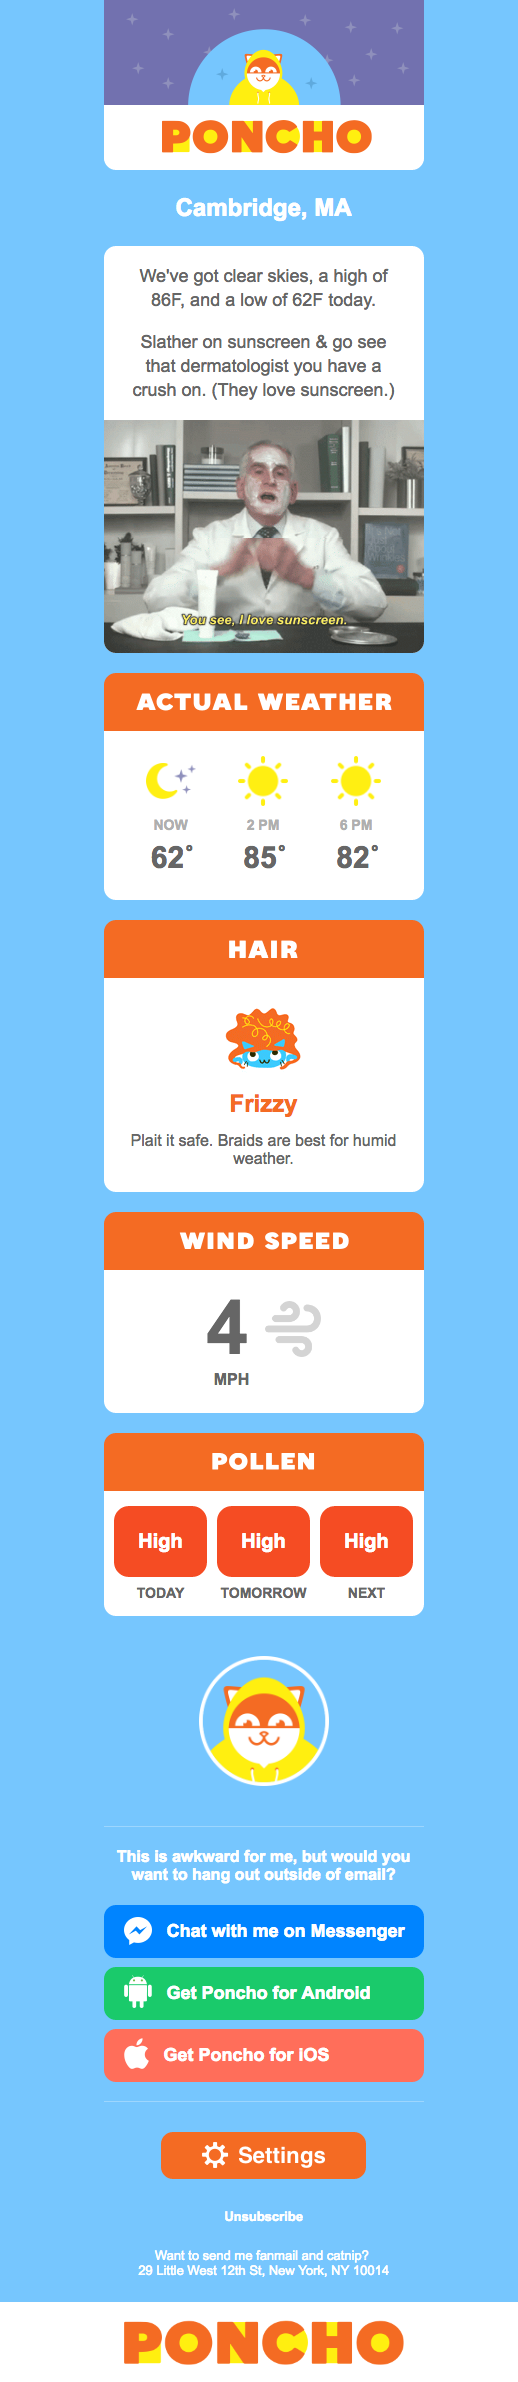 Email marketing campaign with a custom weather forecast by Poncho